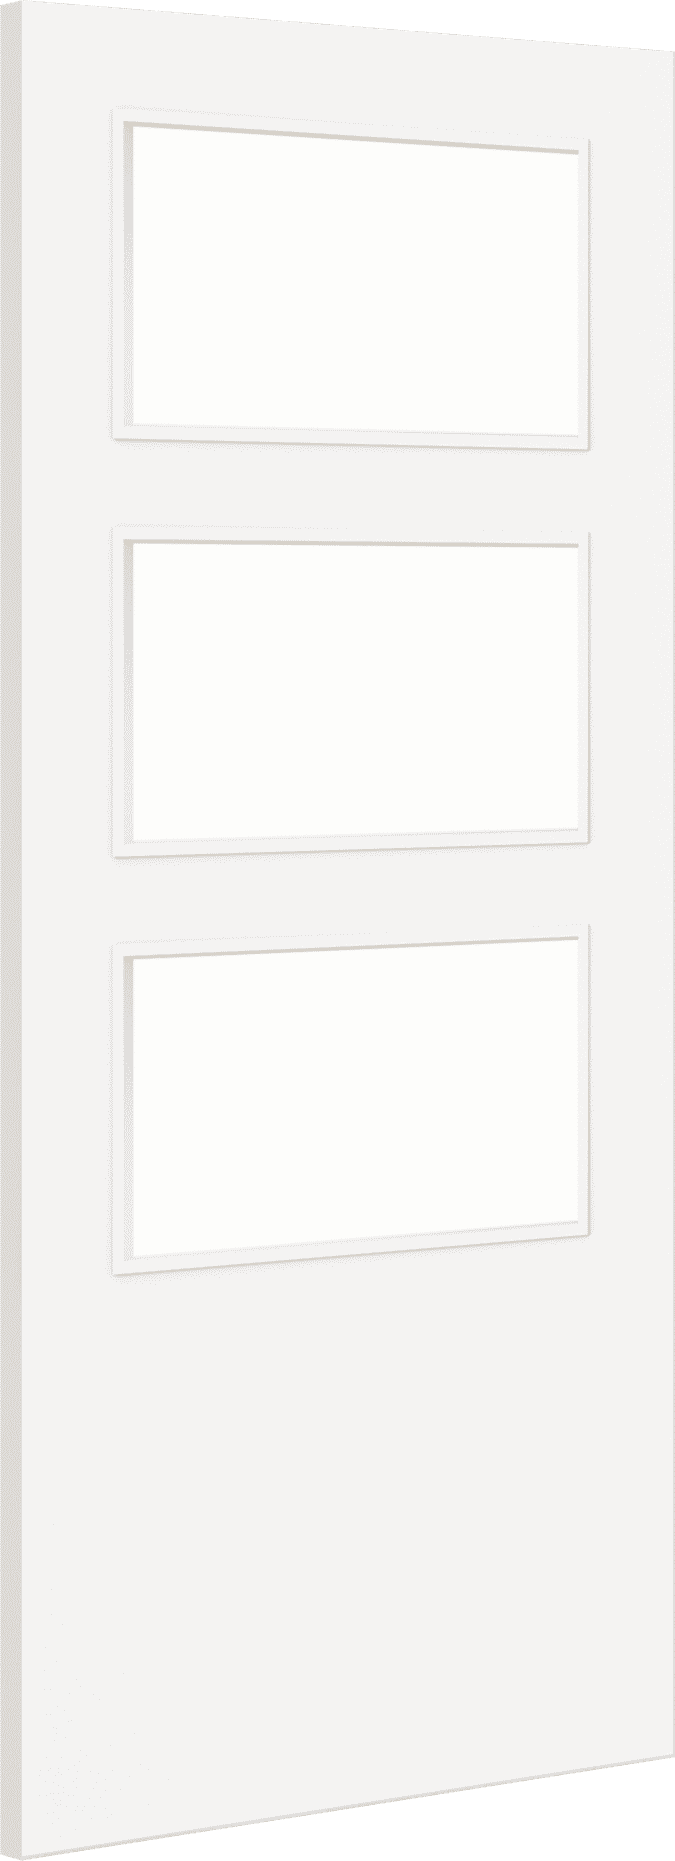 1981mm x 838mm x 44mm (33") Architectural Paint Grade White 03 Frosted Glazed Fire Door Blank